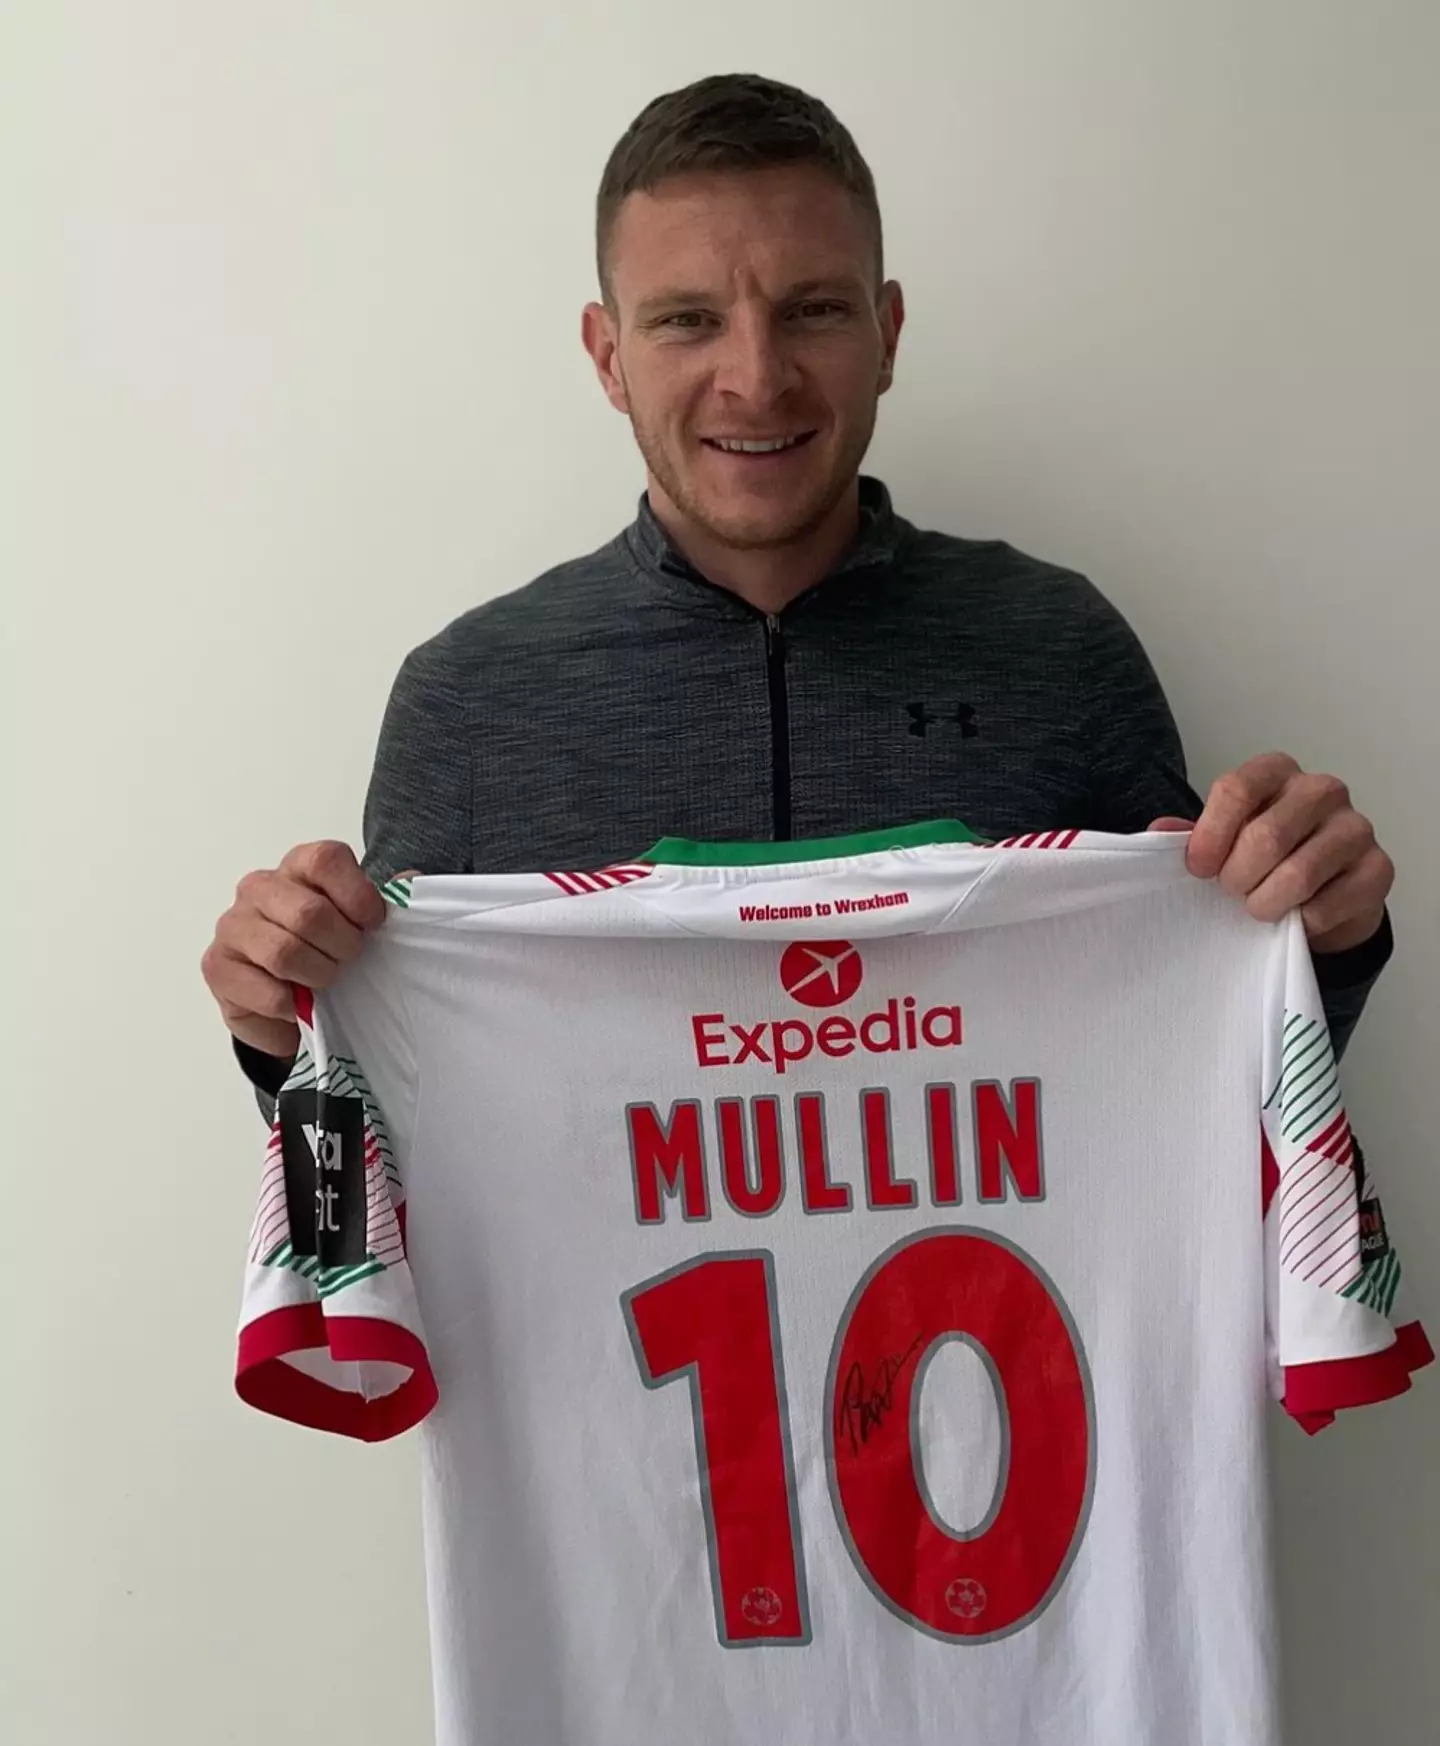 Paul Mullin has been a star player for Wrexham player this season.